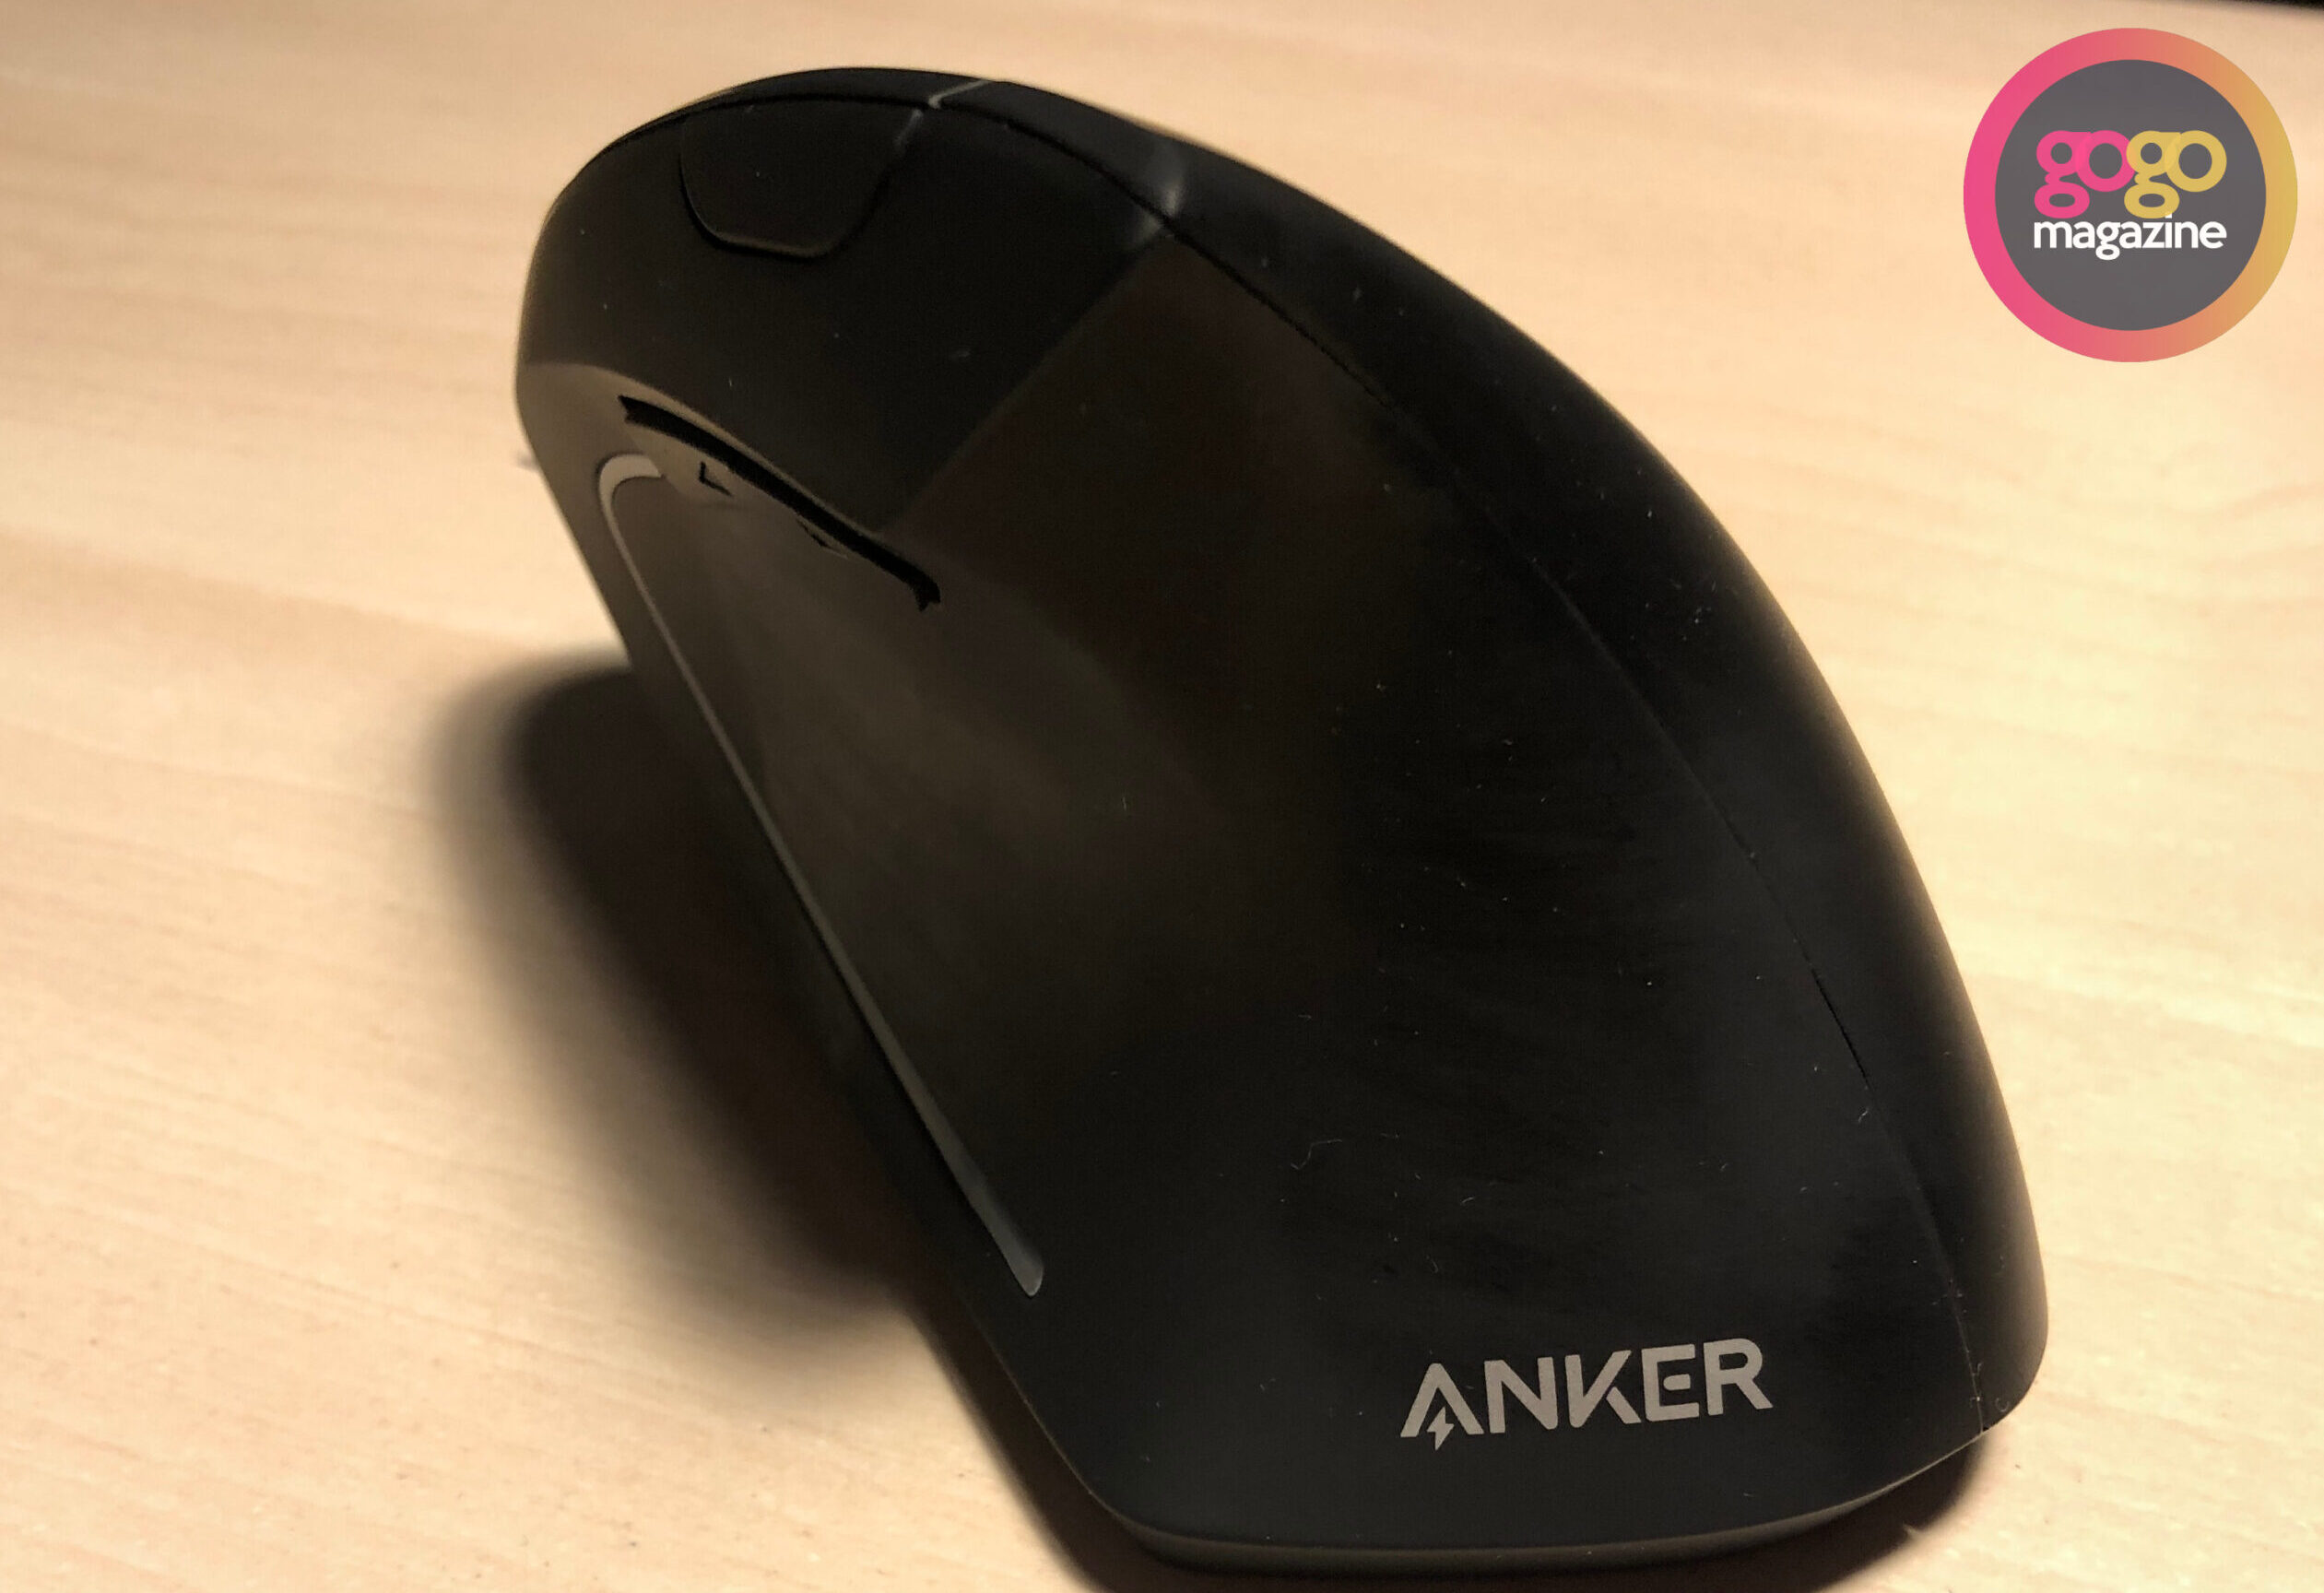 mouse verticale anker